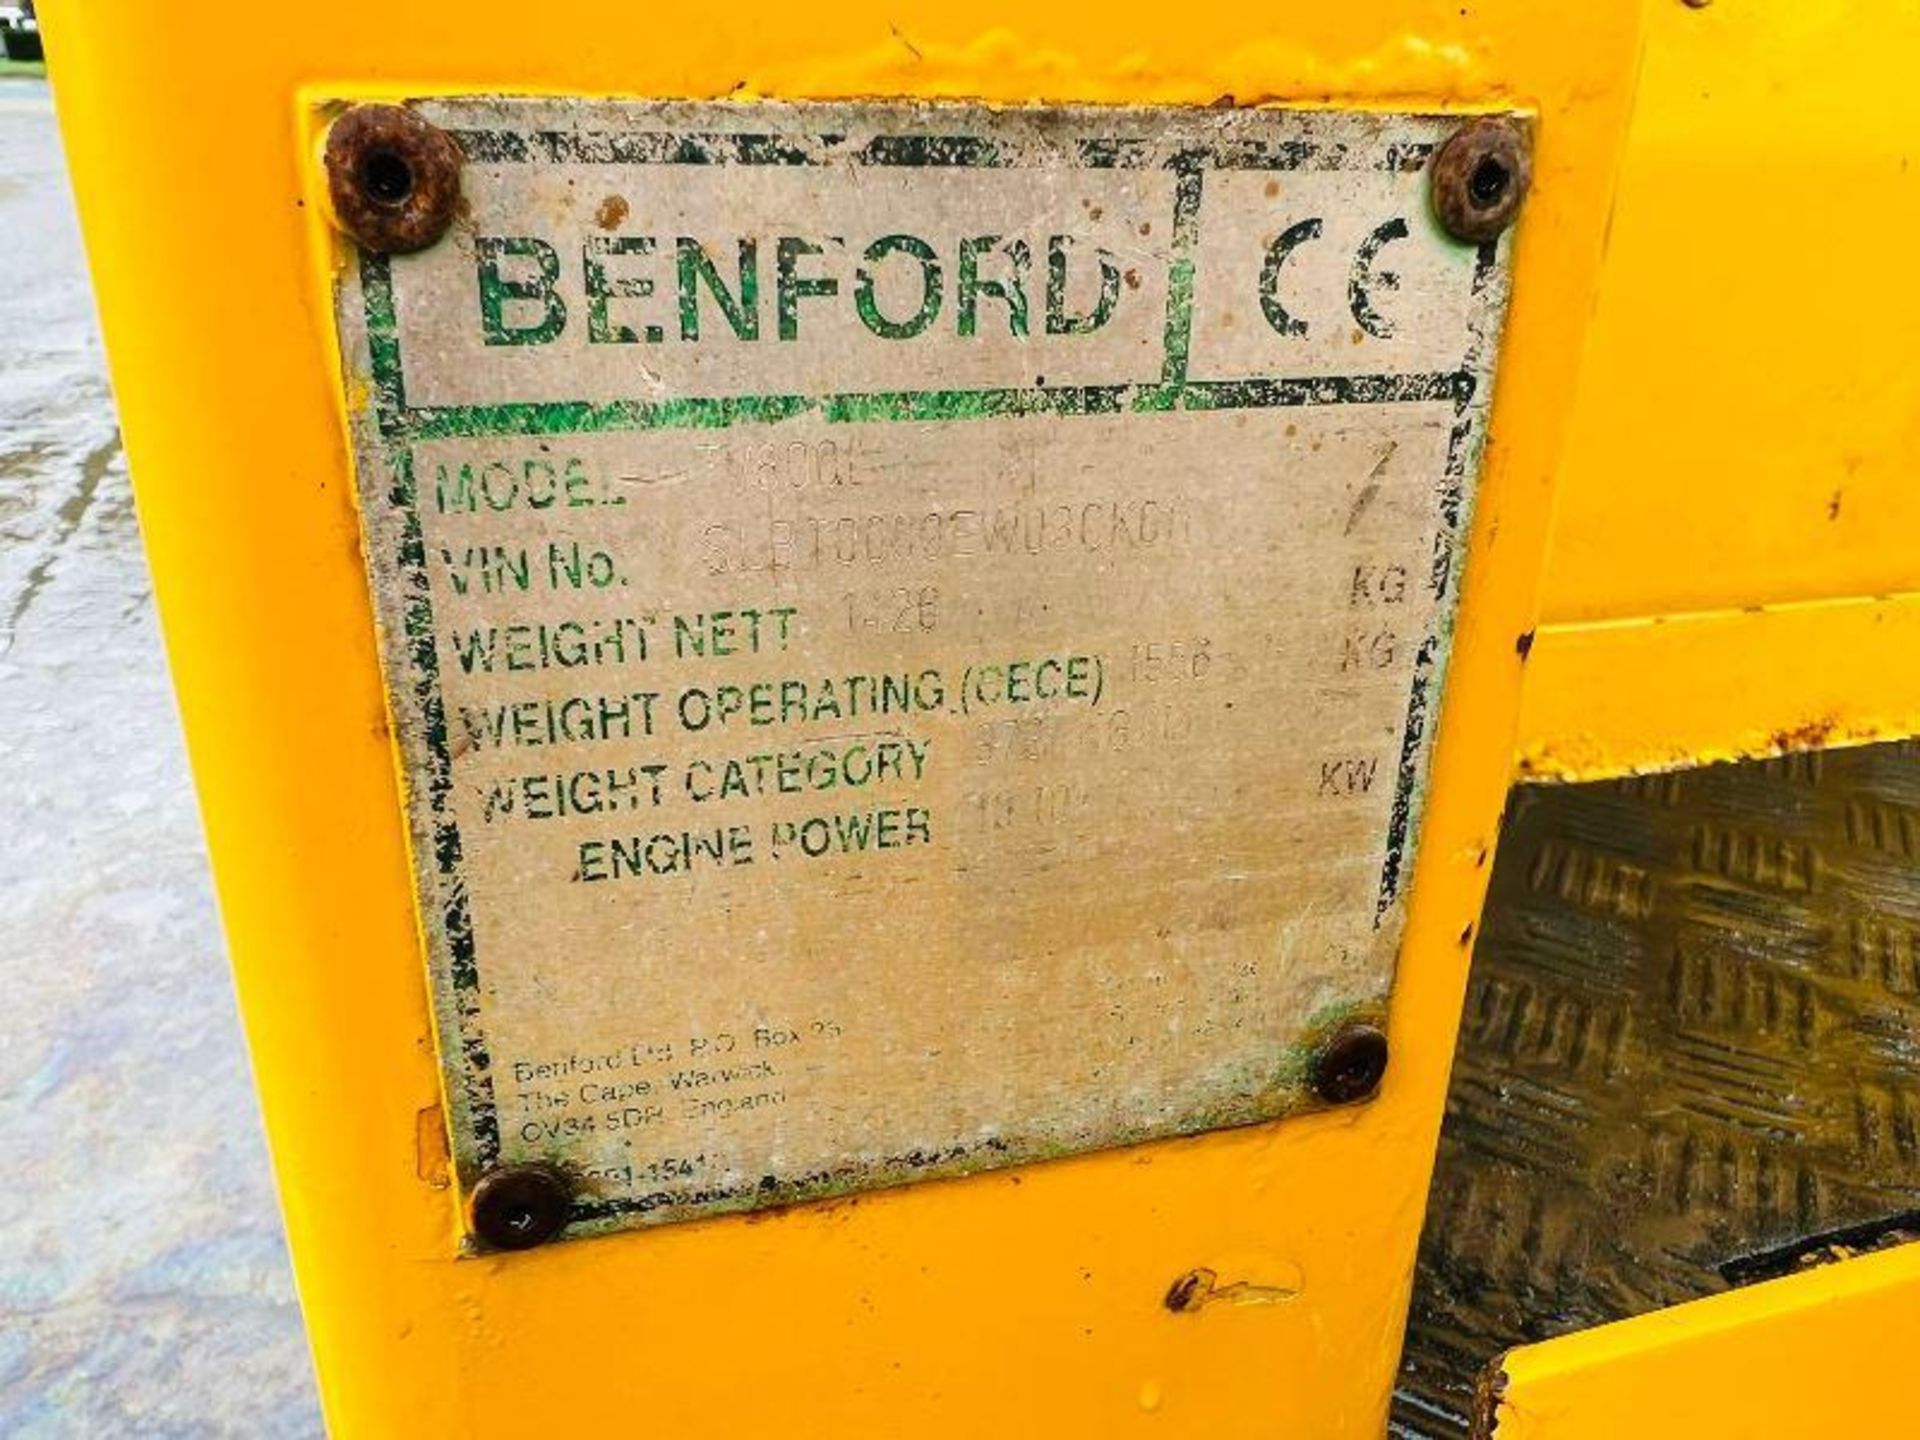 BENFORD TV800 DOUBLE DRUM ROLLER C/W ROLE BAR & LISTER ENGINE - Image 2 of 8